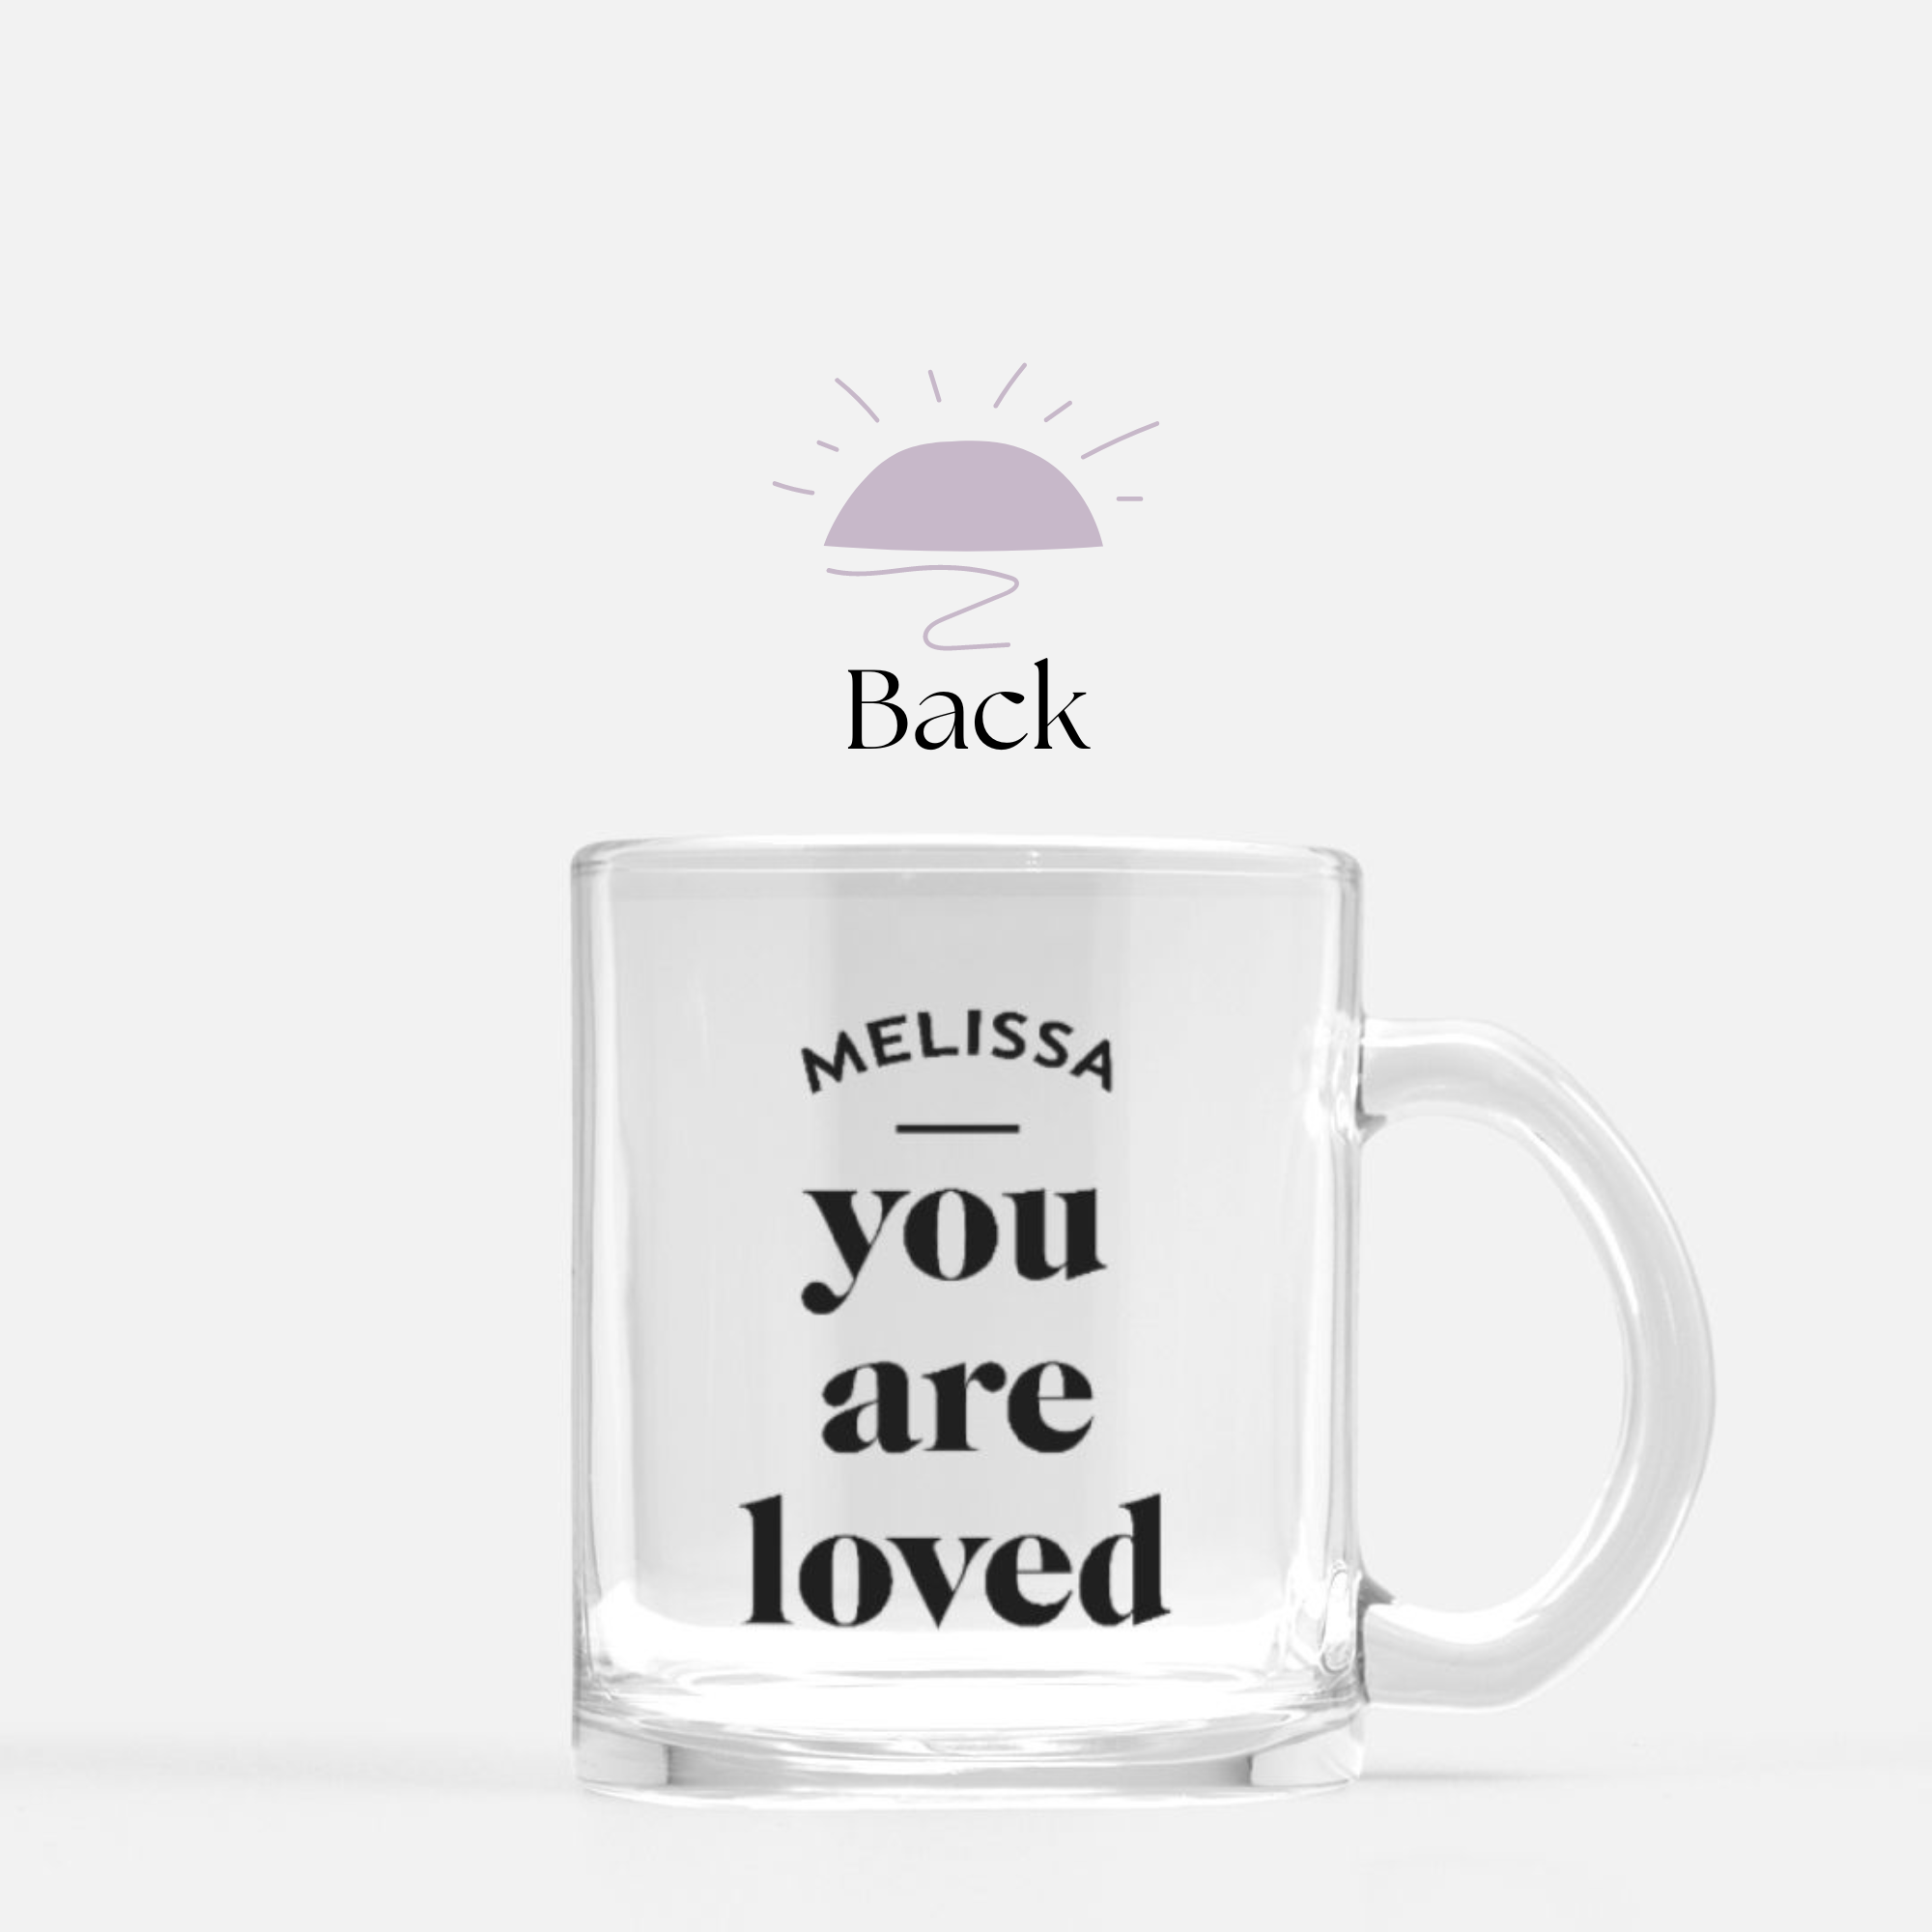 You are loved personalized glass mug - back